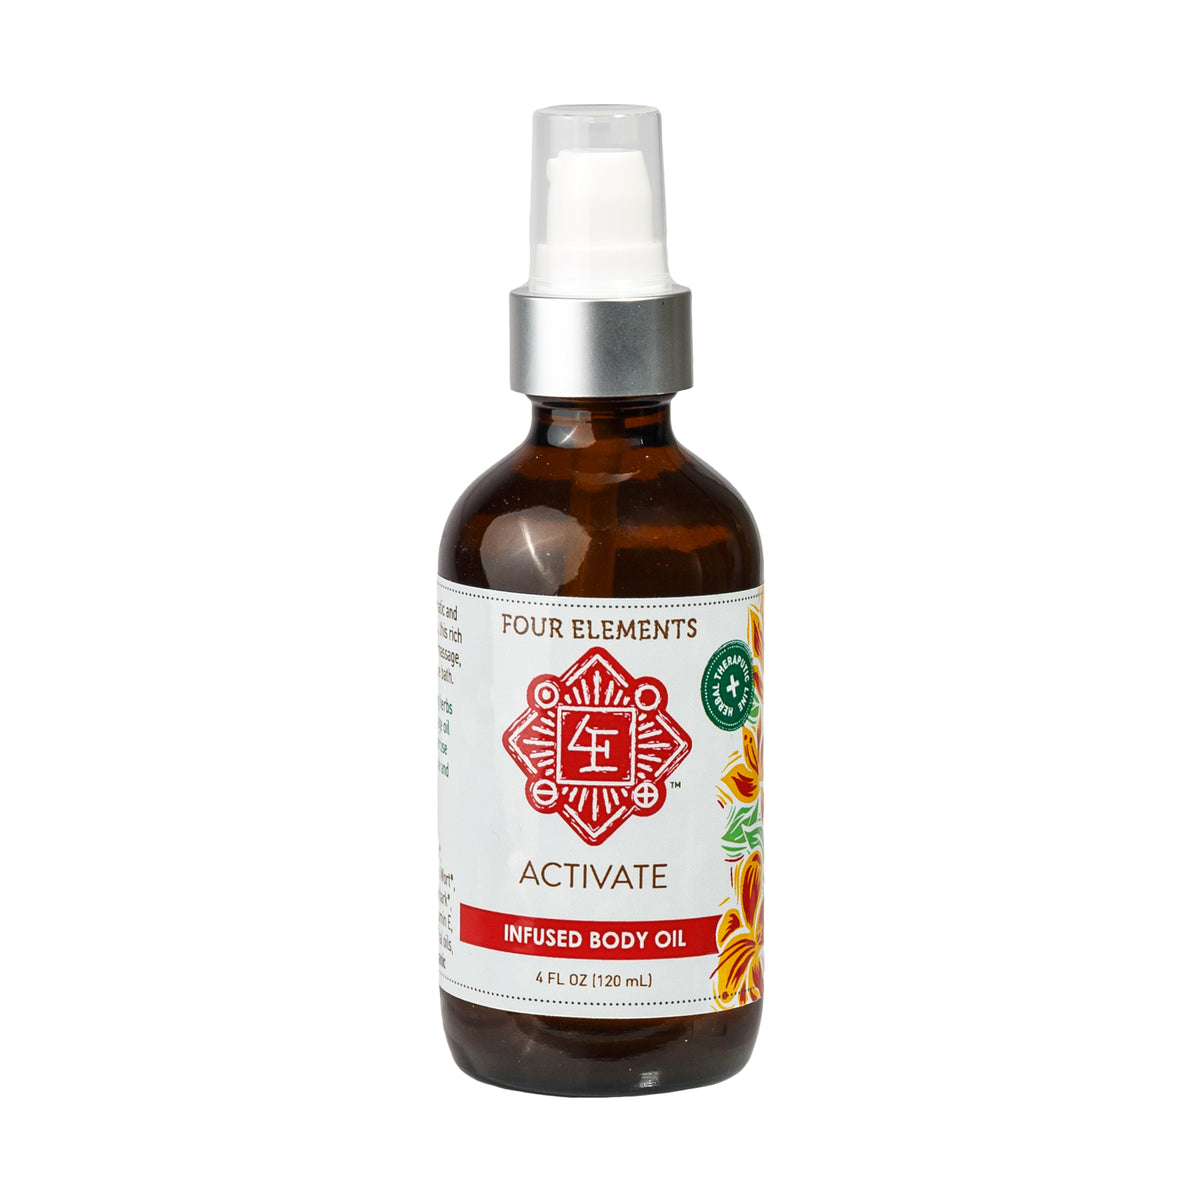 Primary Image of Activate Body Oil 